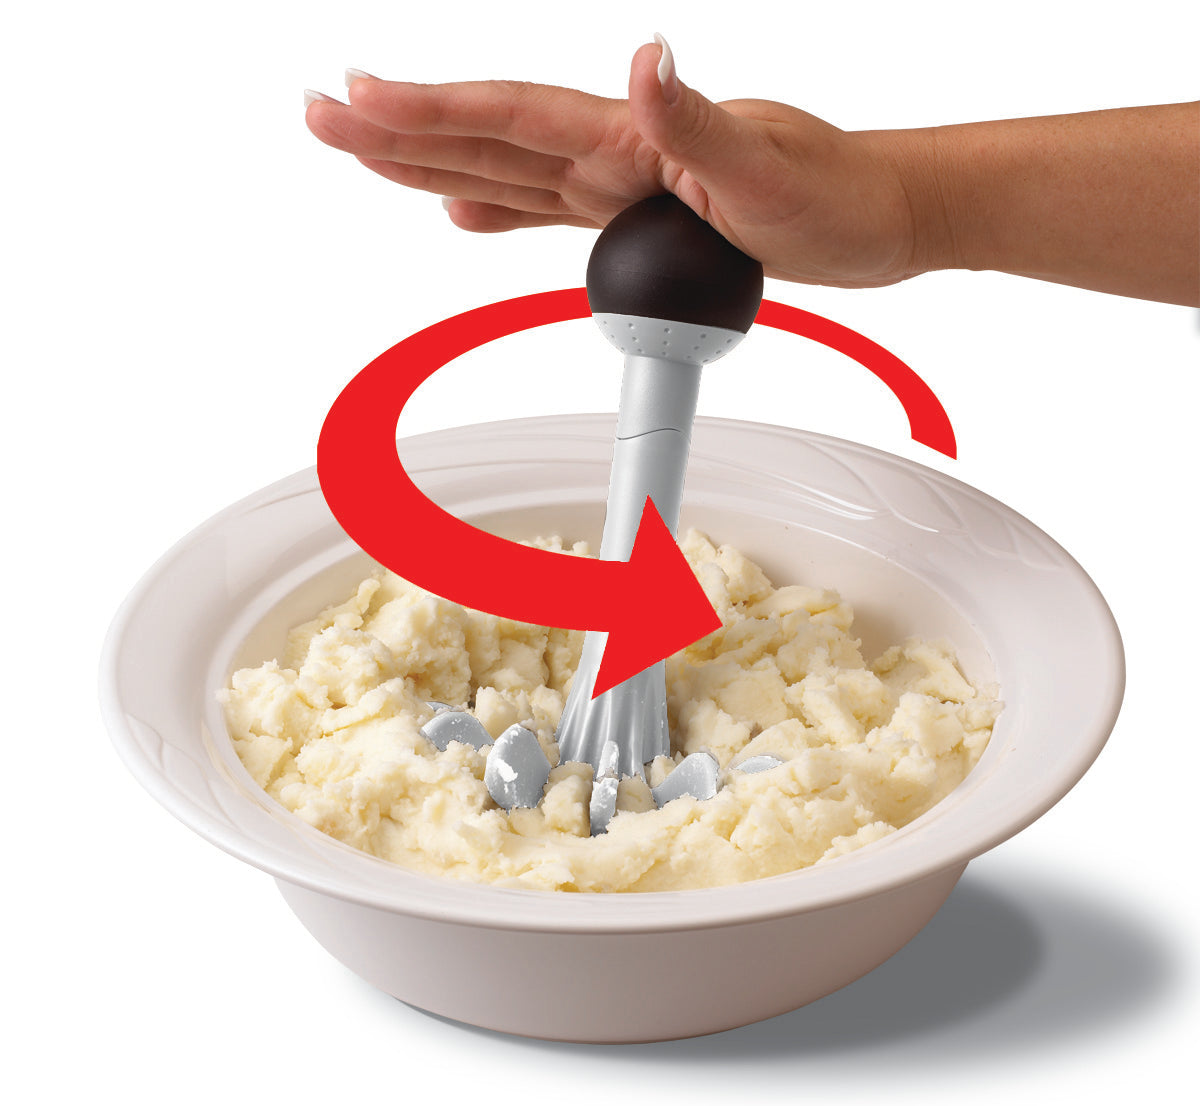 Spudnik - Potato Masher. The best masher for fast and easy mashed